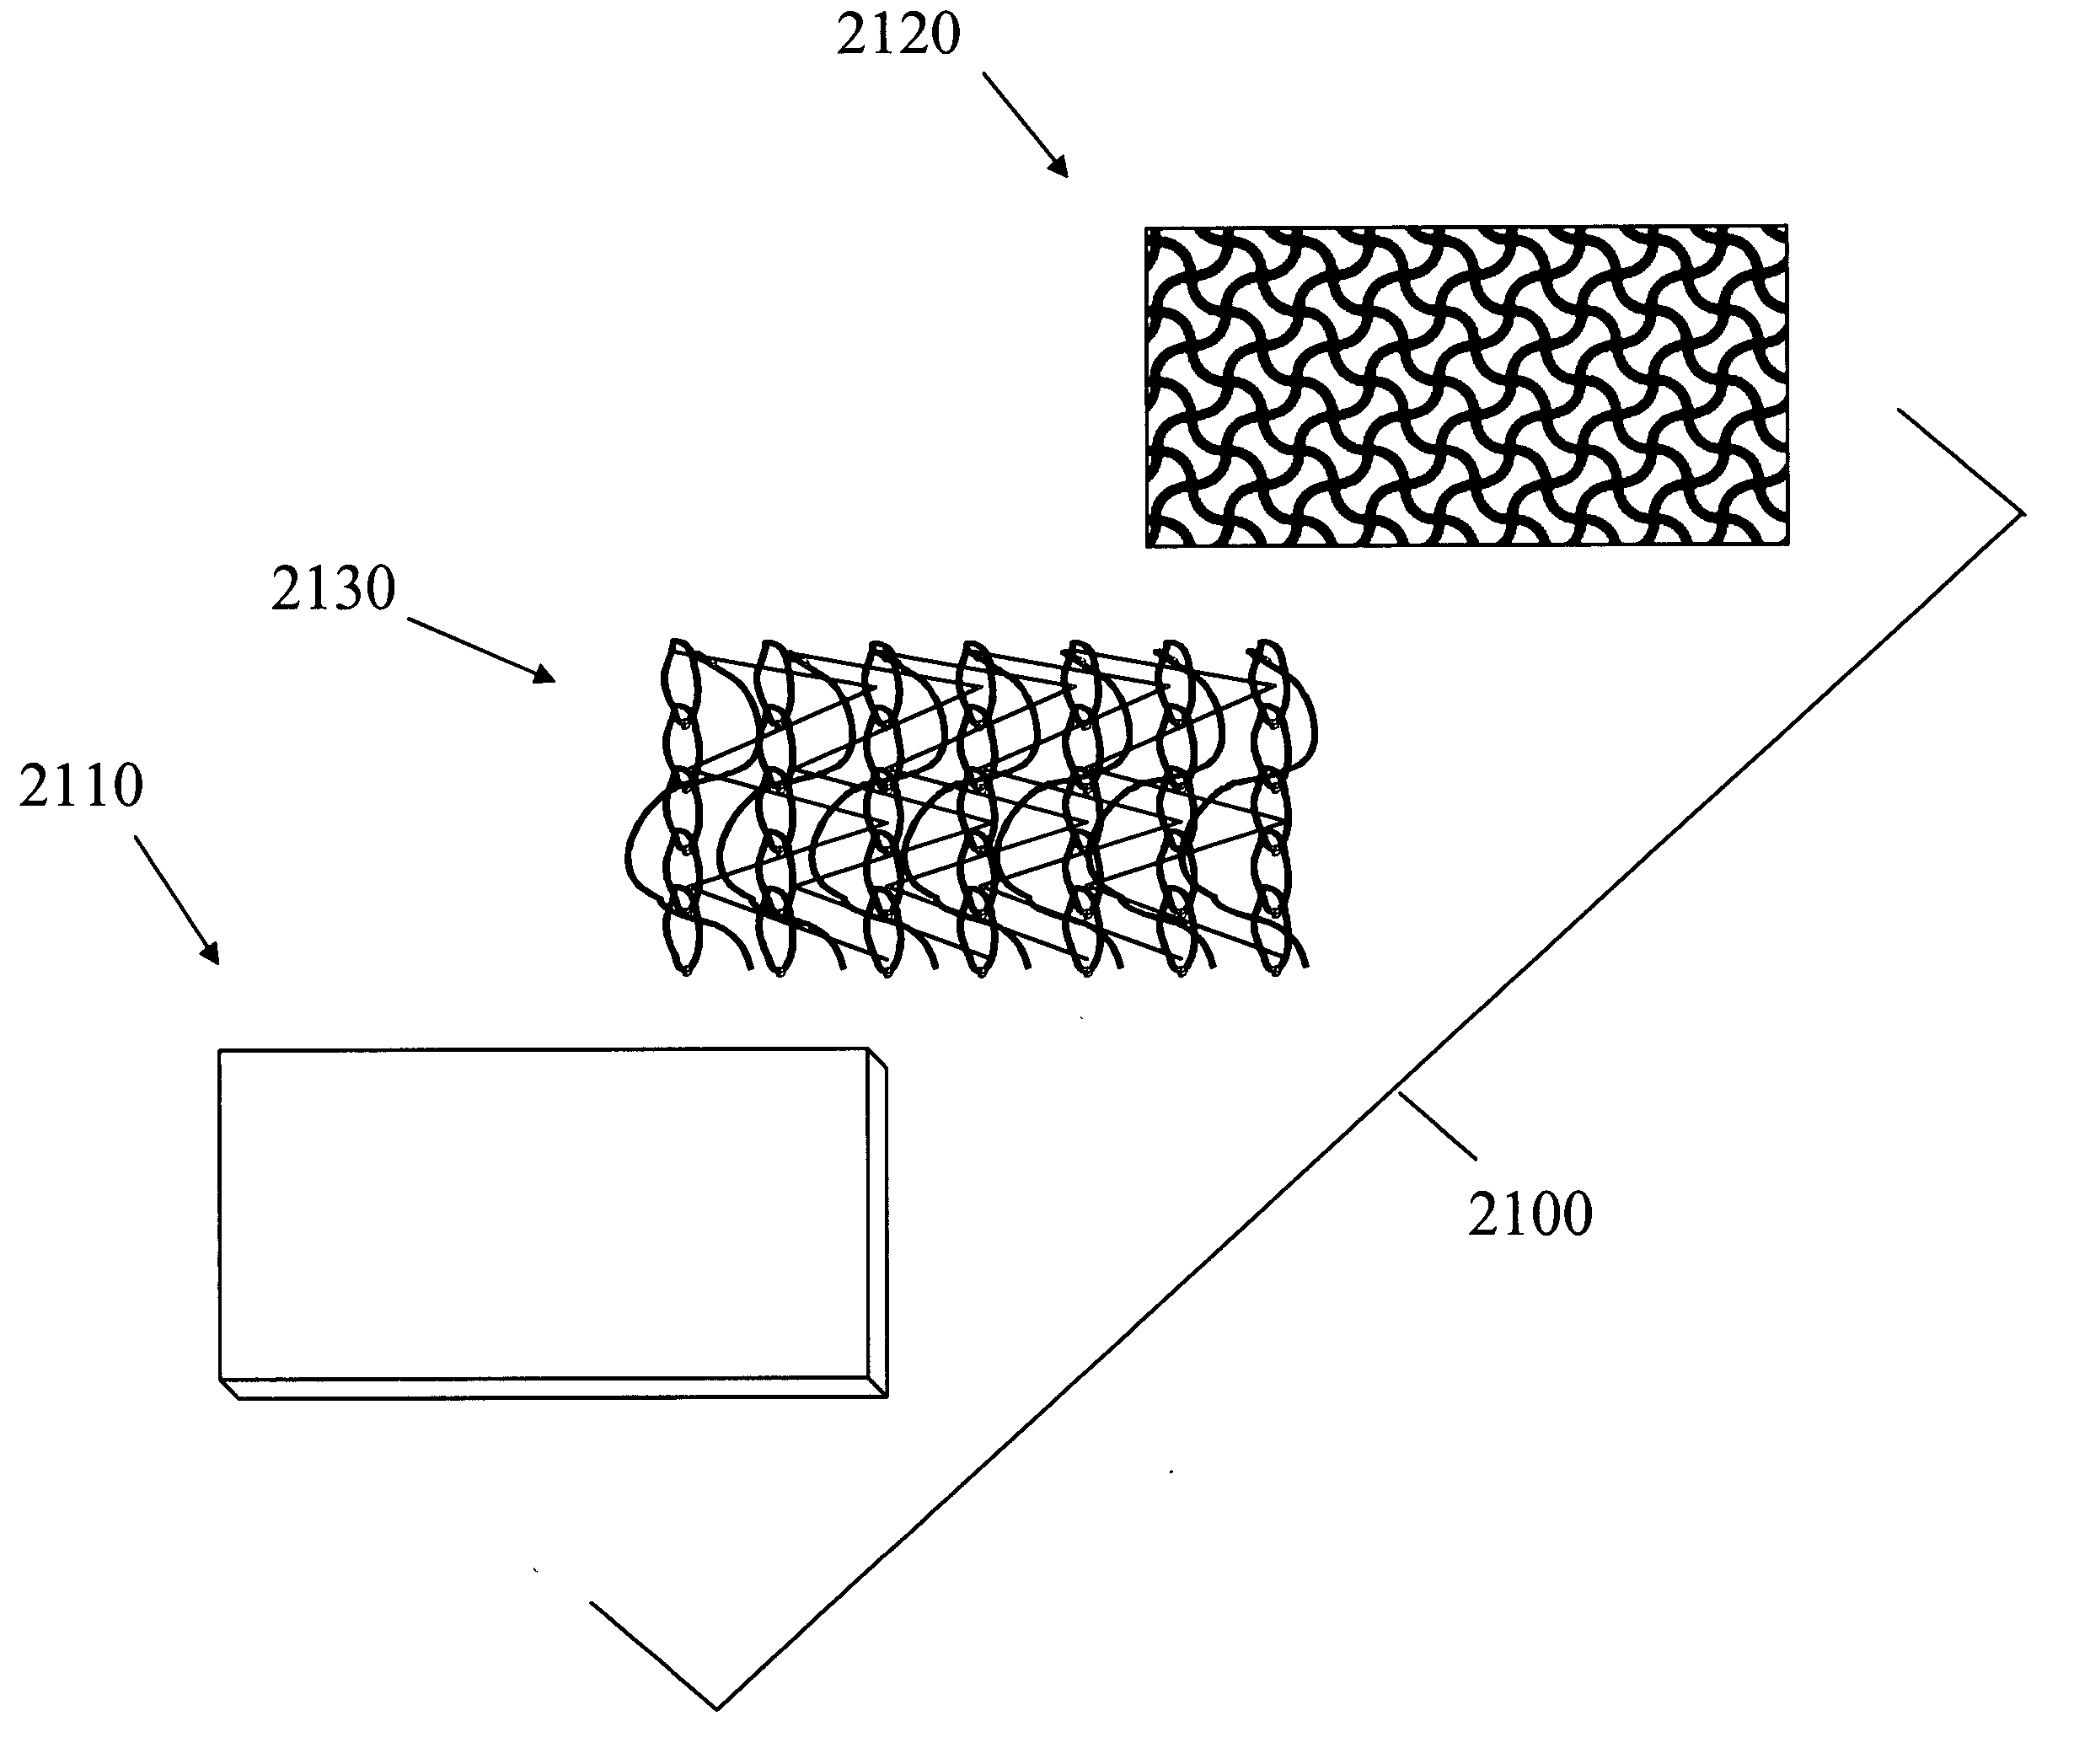 Bonding patterns for construction of a knitted fabric landing zone